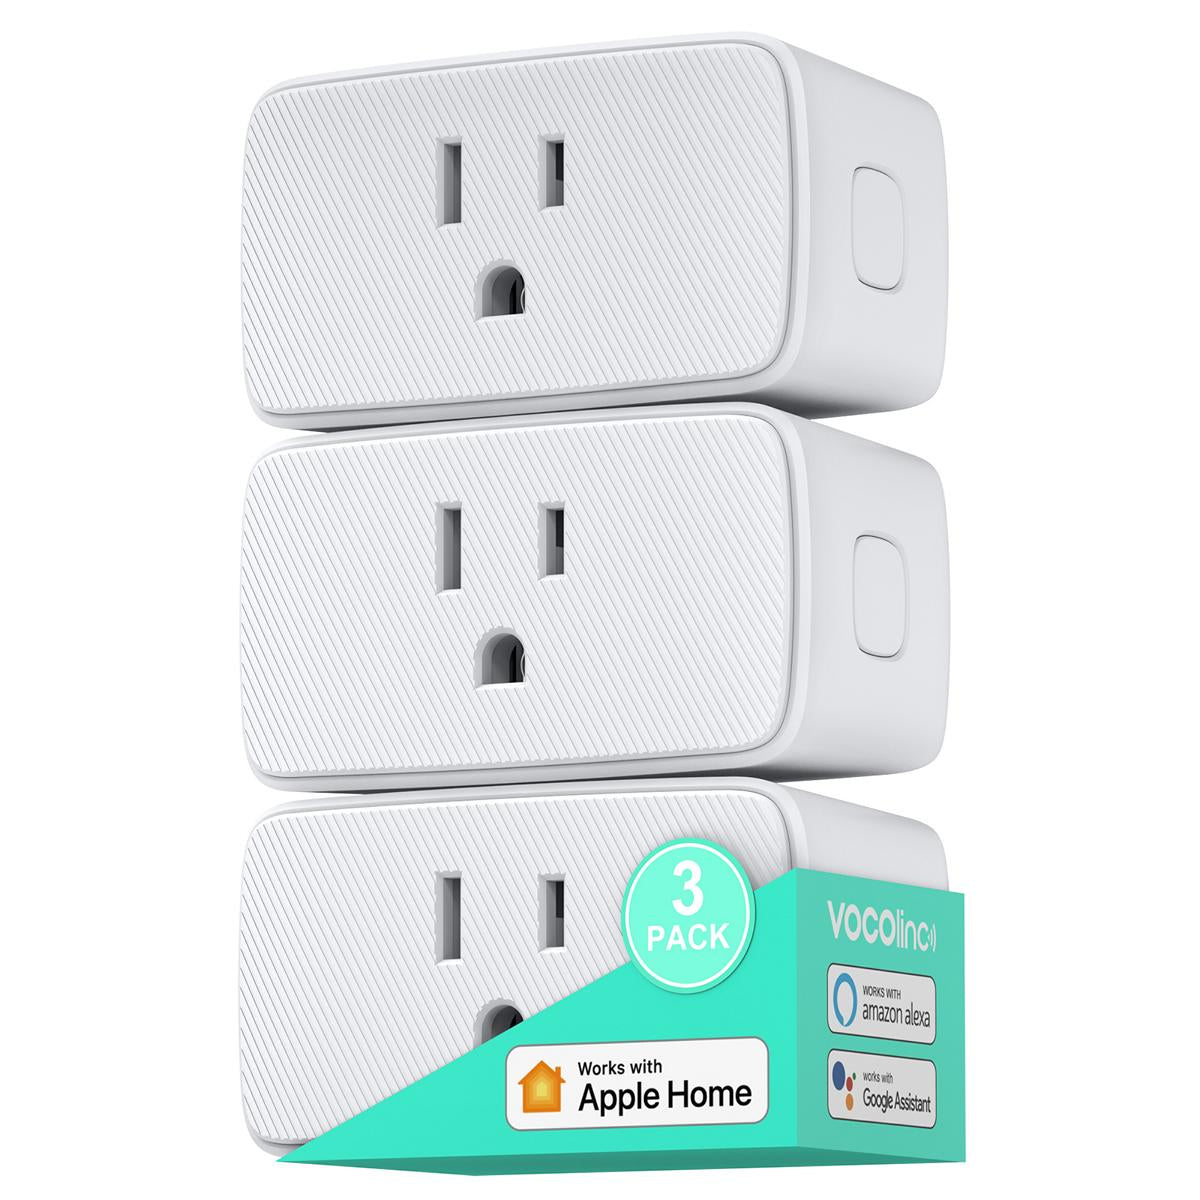 smart plug google home mini Archives - Switched On Network